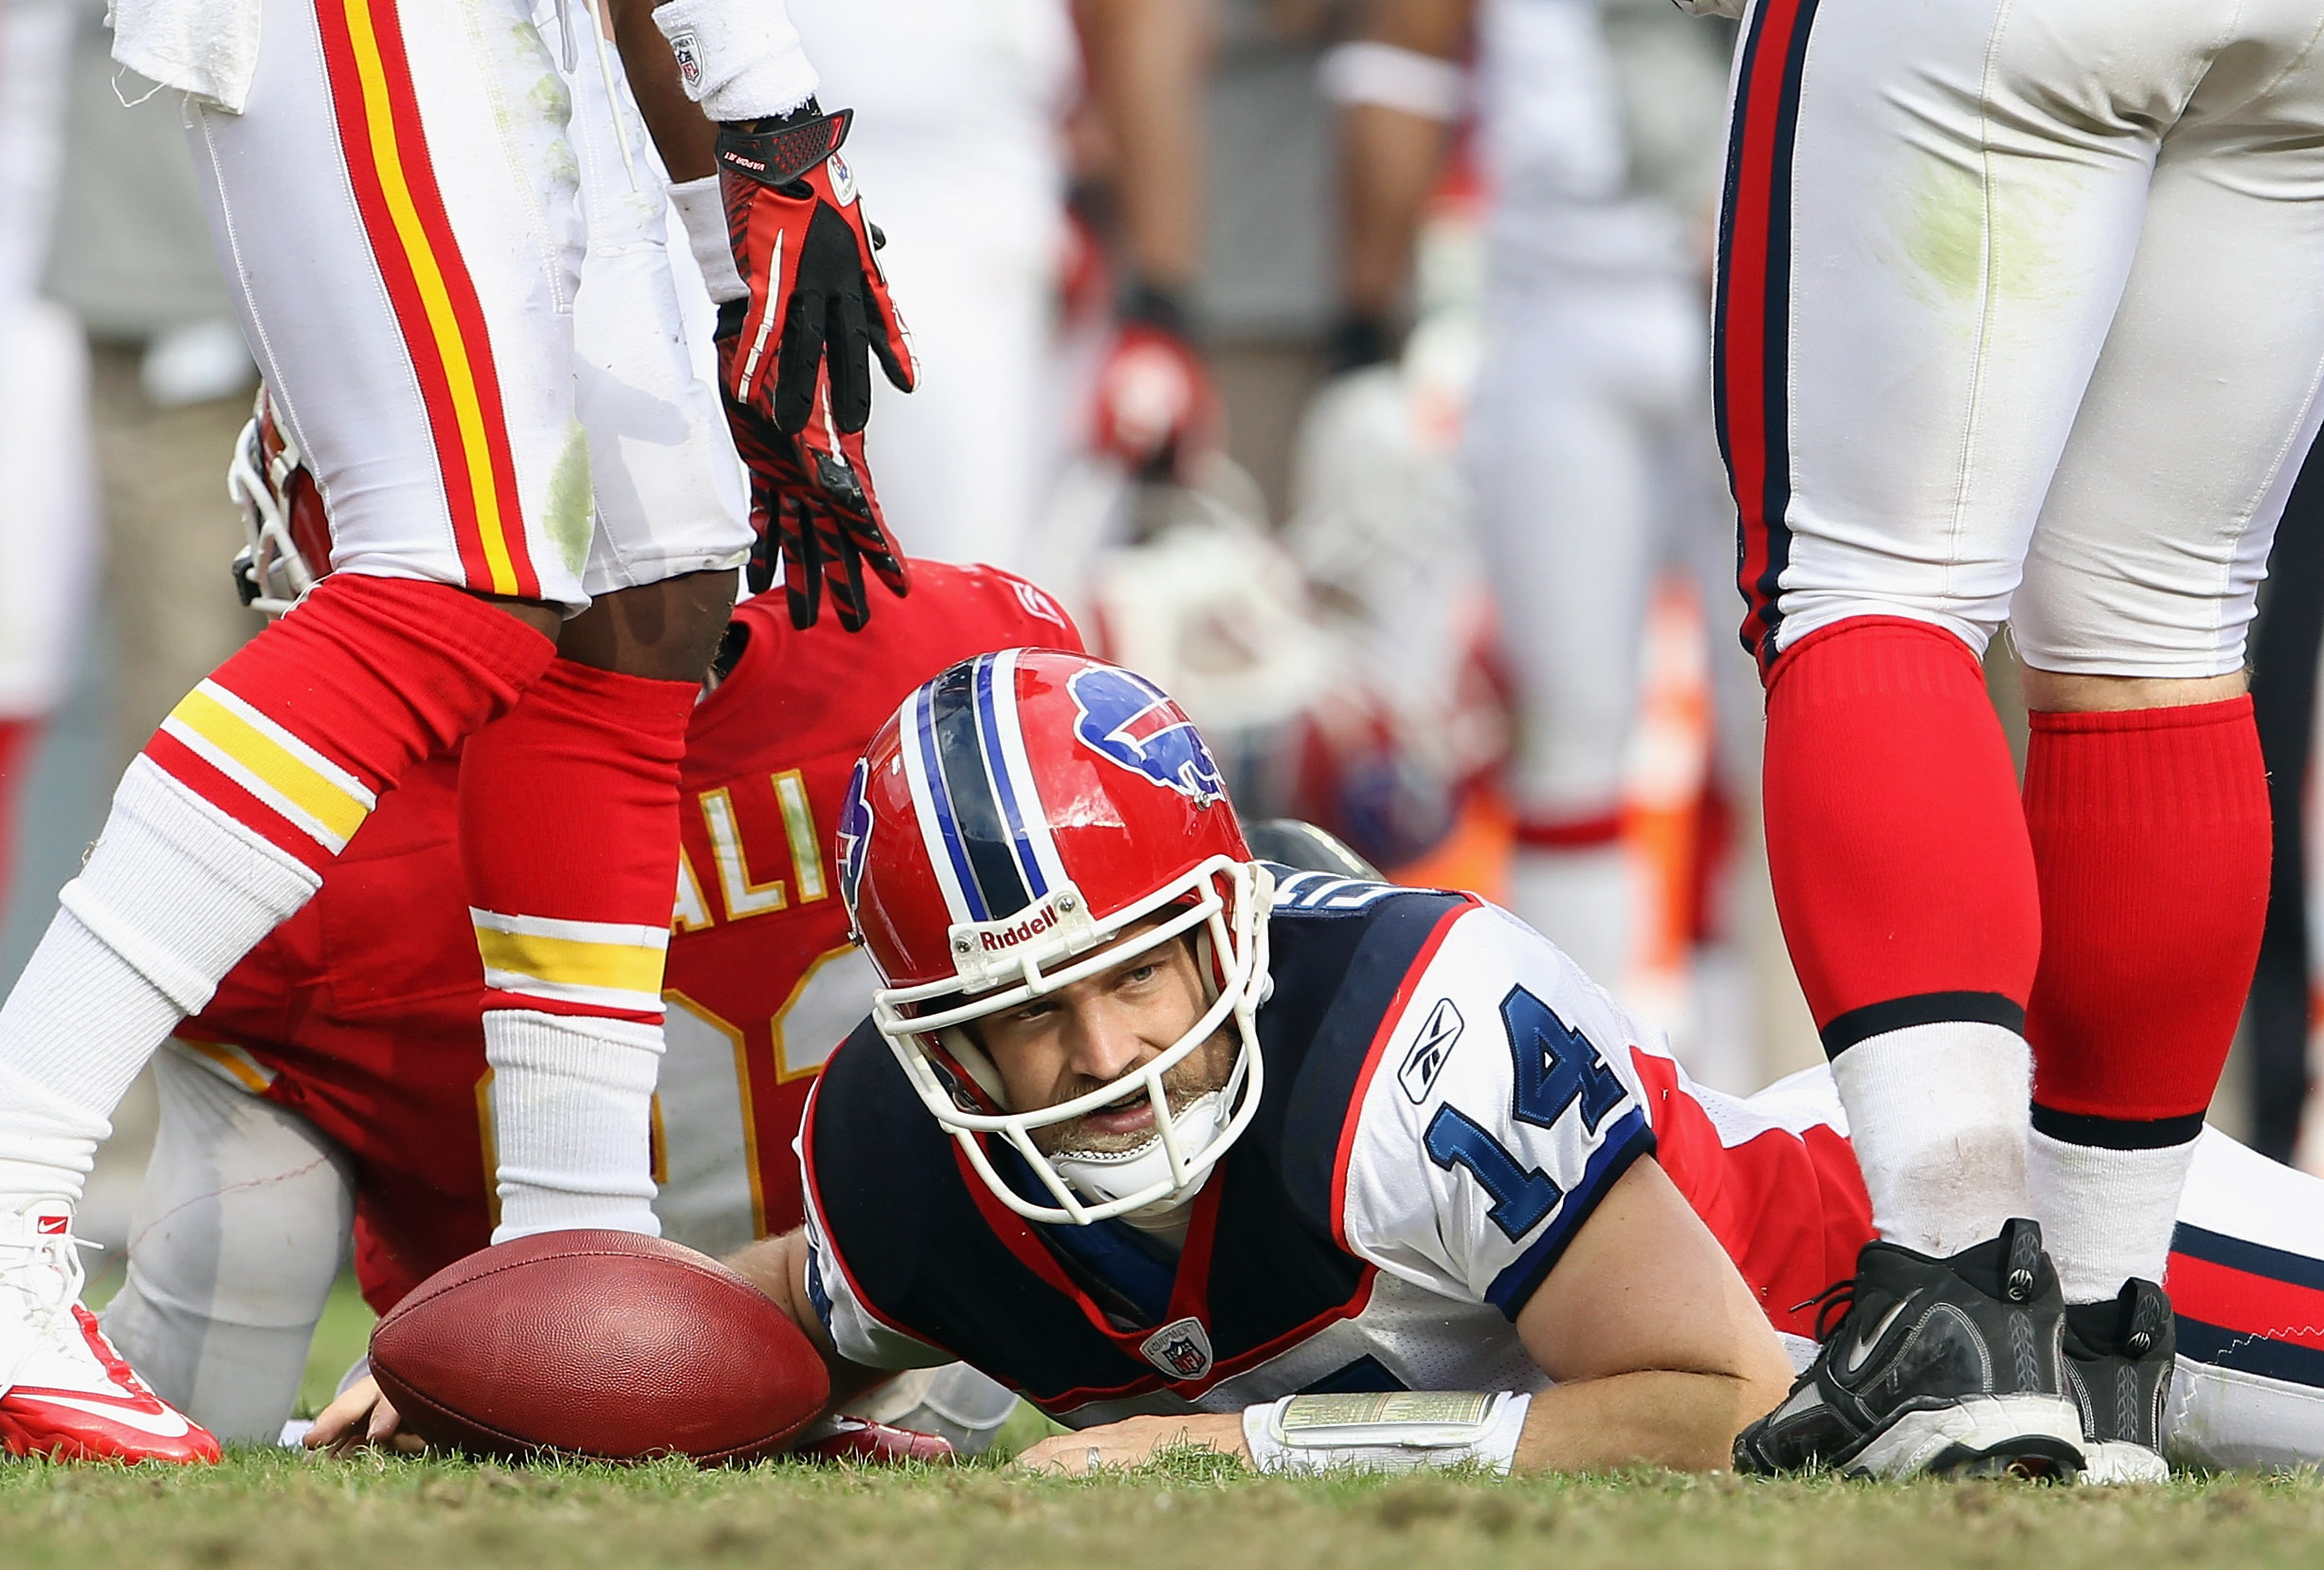 KANSAS CITY, MO - OCTOBER 31:  Quarterback Ryan Fitzpatrick #14 of the Buffalo Bills tries for a first down during the game against the Kansas City Chiefs on October 31, 2010  at Arrowhead Stadium in Kansas City, Missouri.  (Photo by Jamie Squire/Getty Im